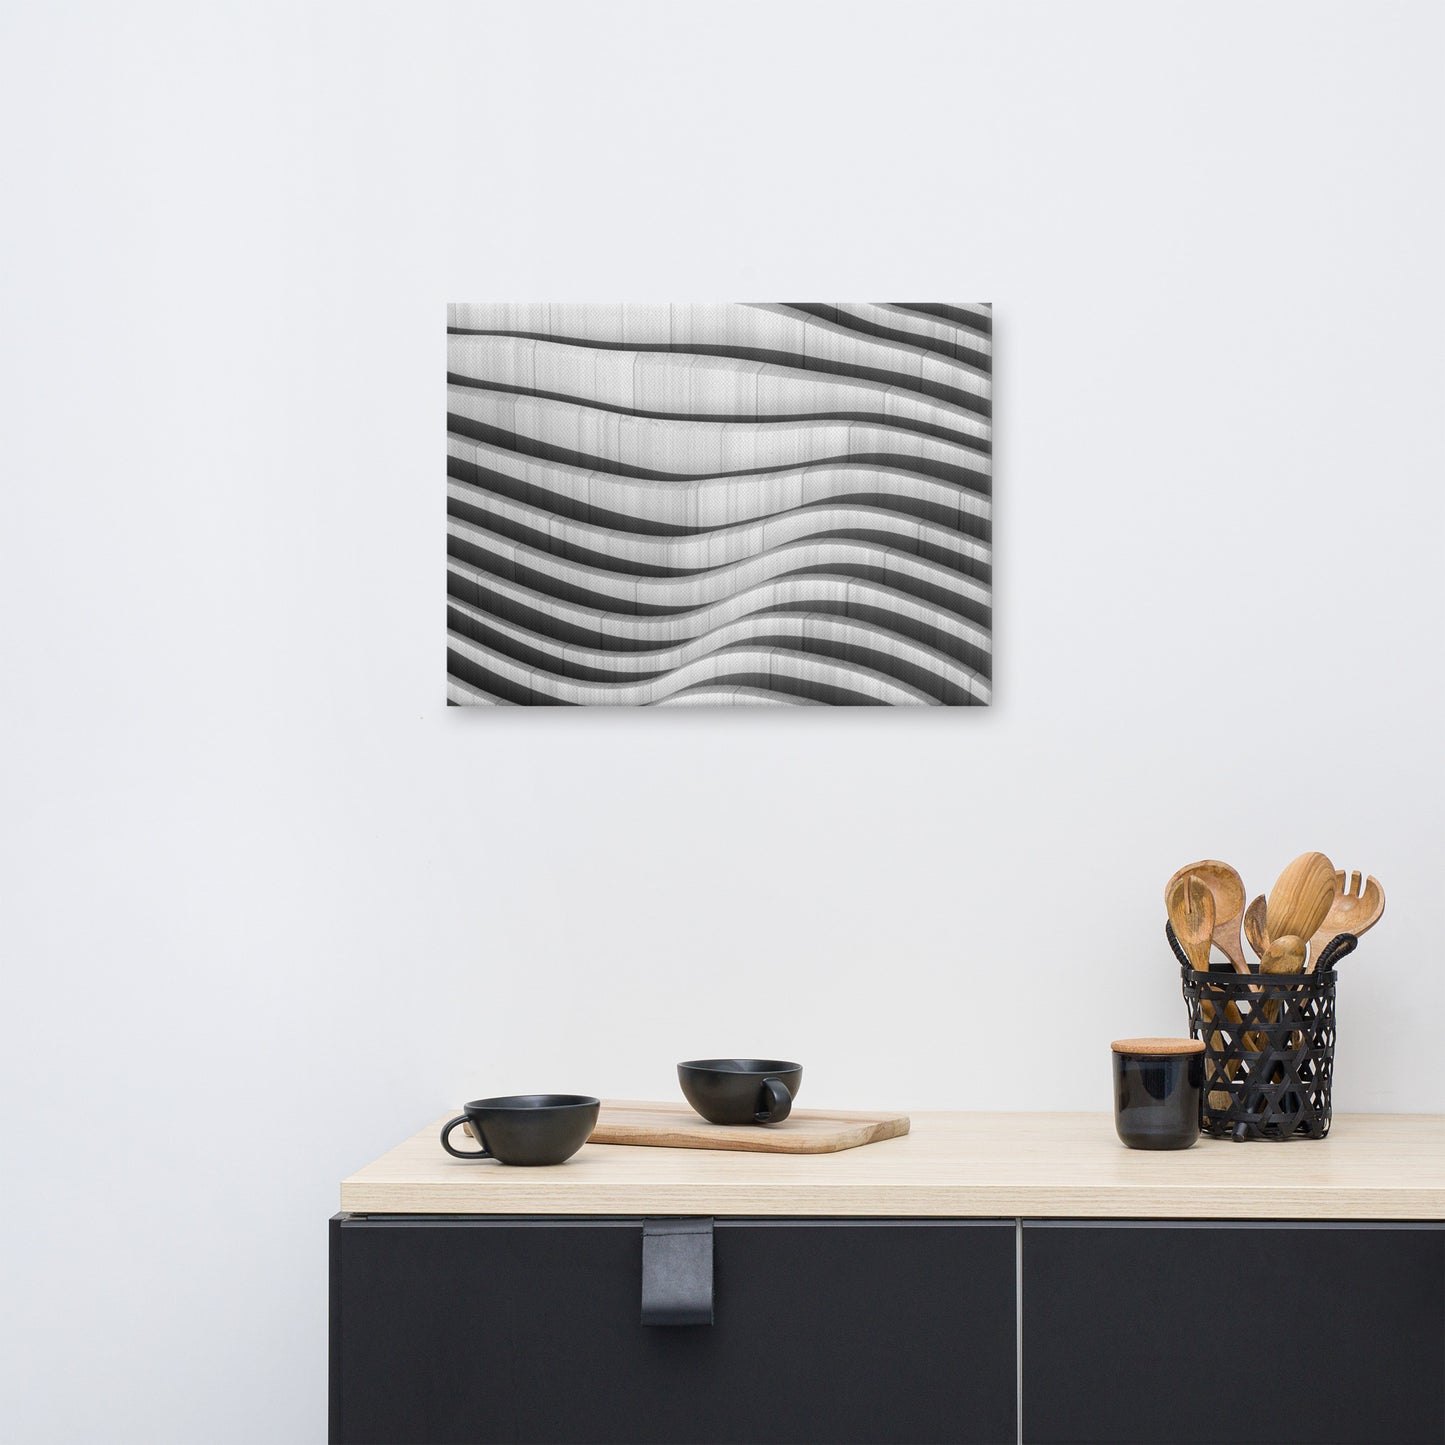 Oceanic Dance Black and White Architectural Photograph Canvas Wall Art Print